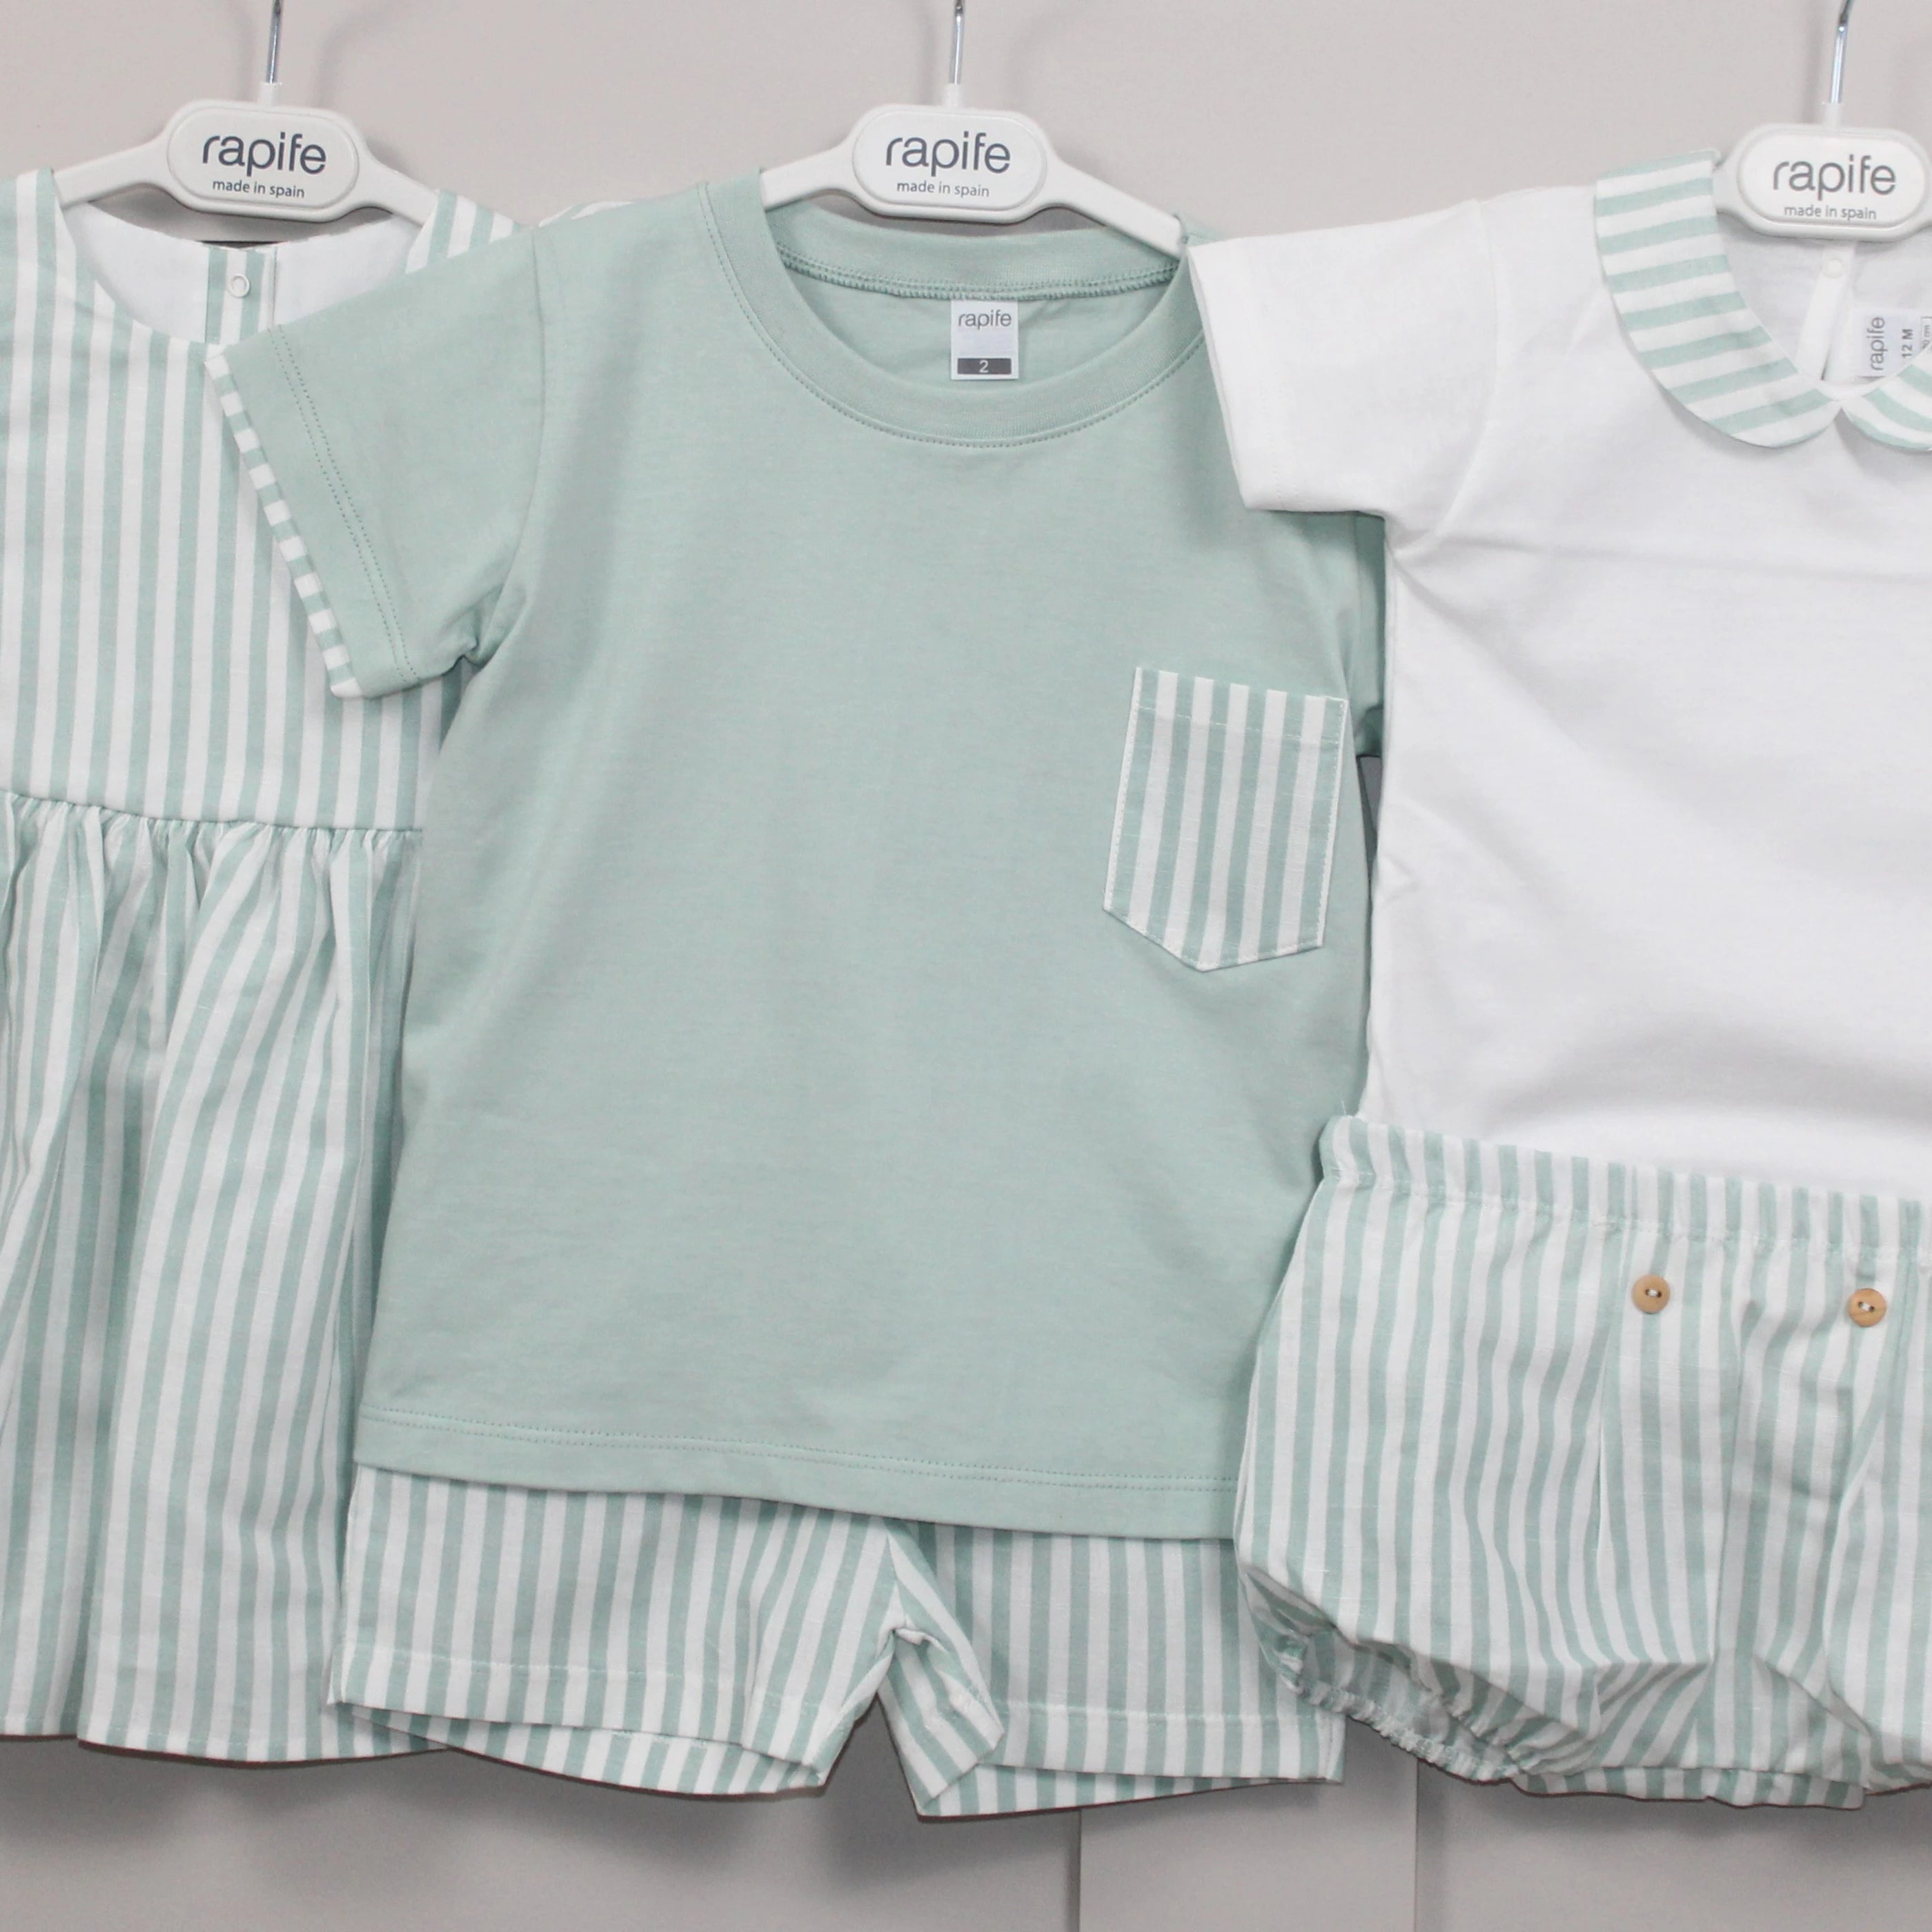 rapife Mint striped summer collection